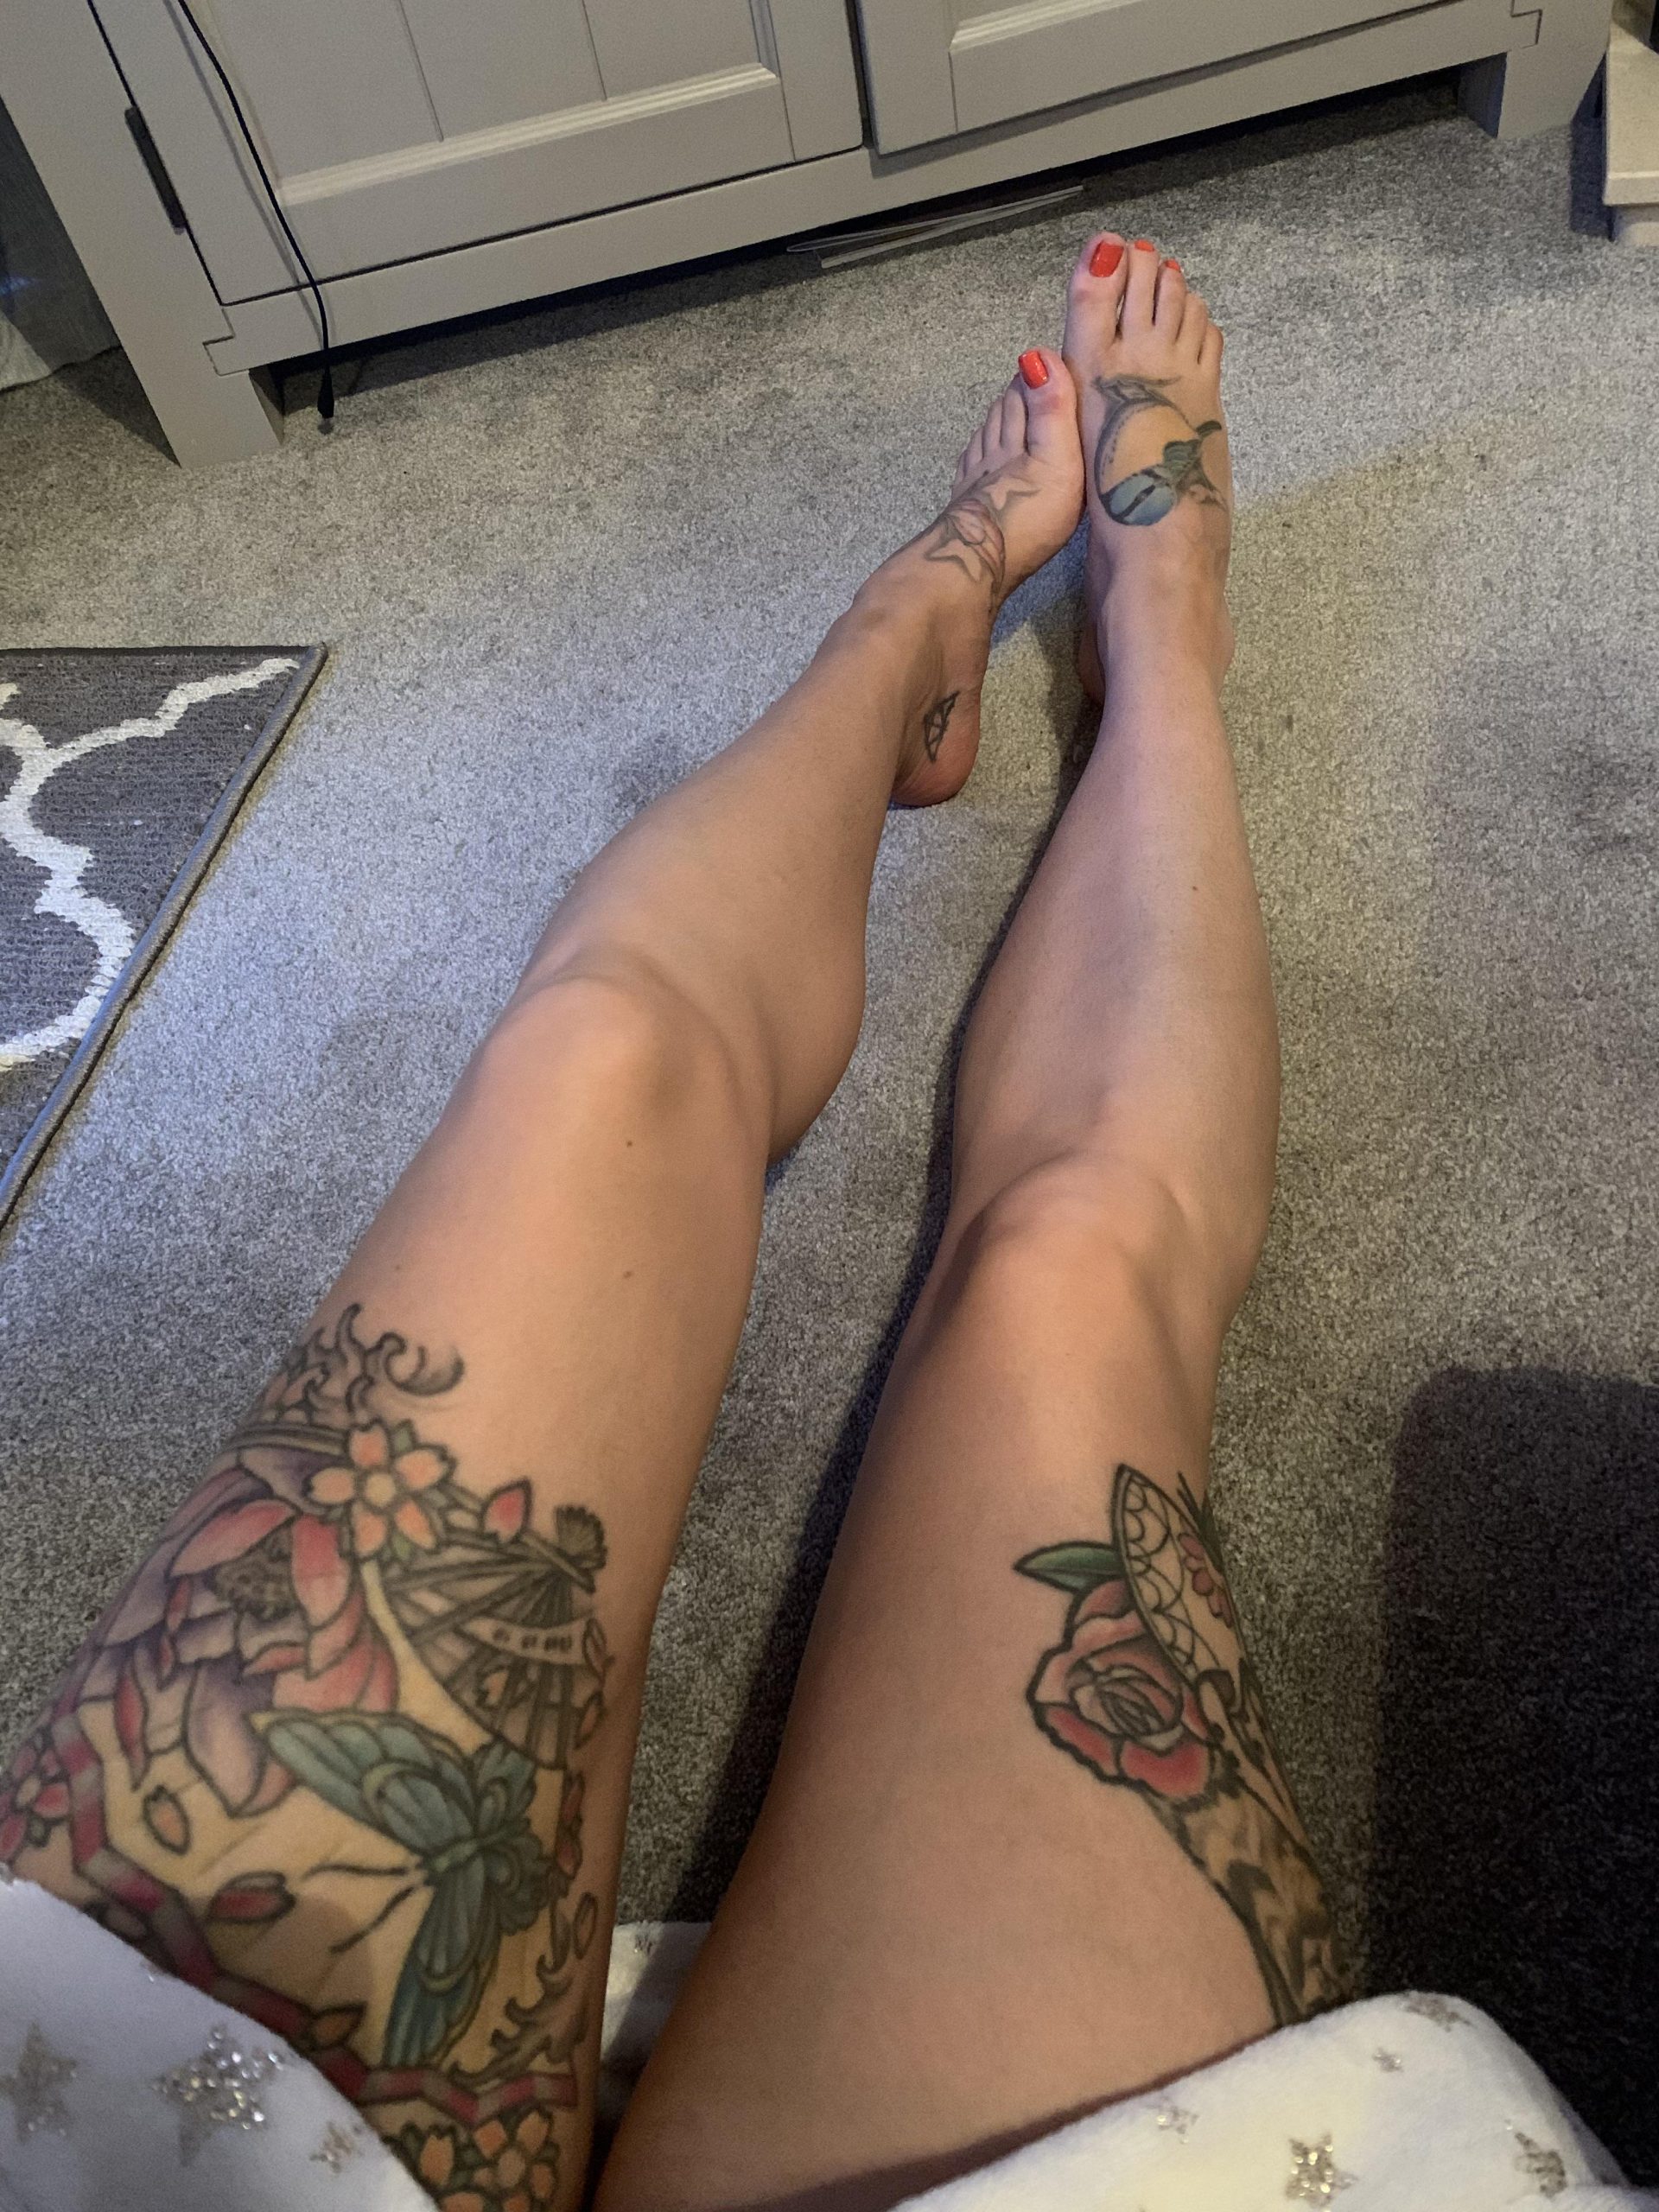 Can’t Wait To Get More On My Legs